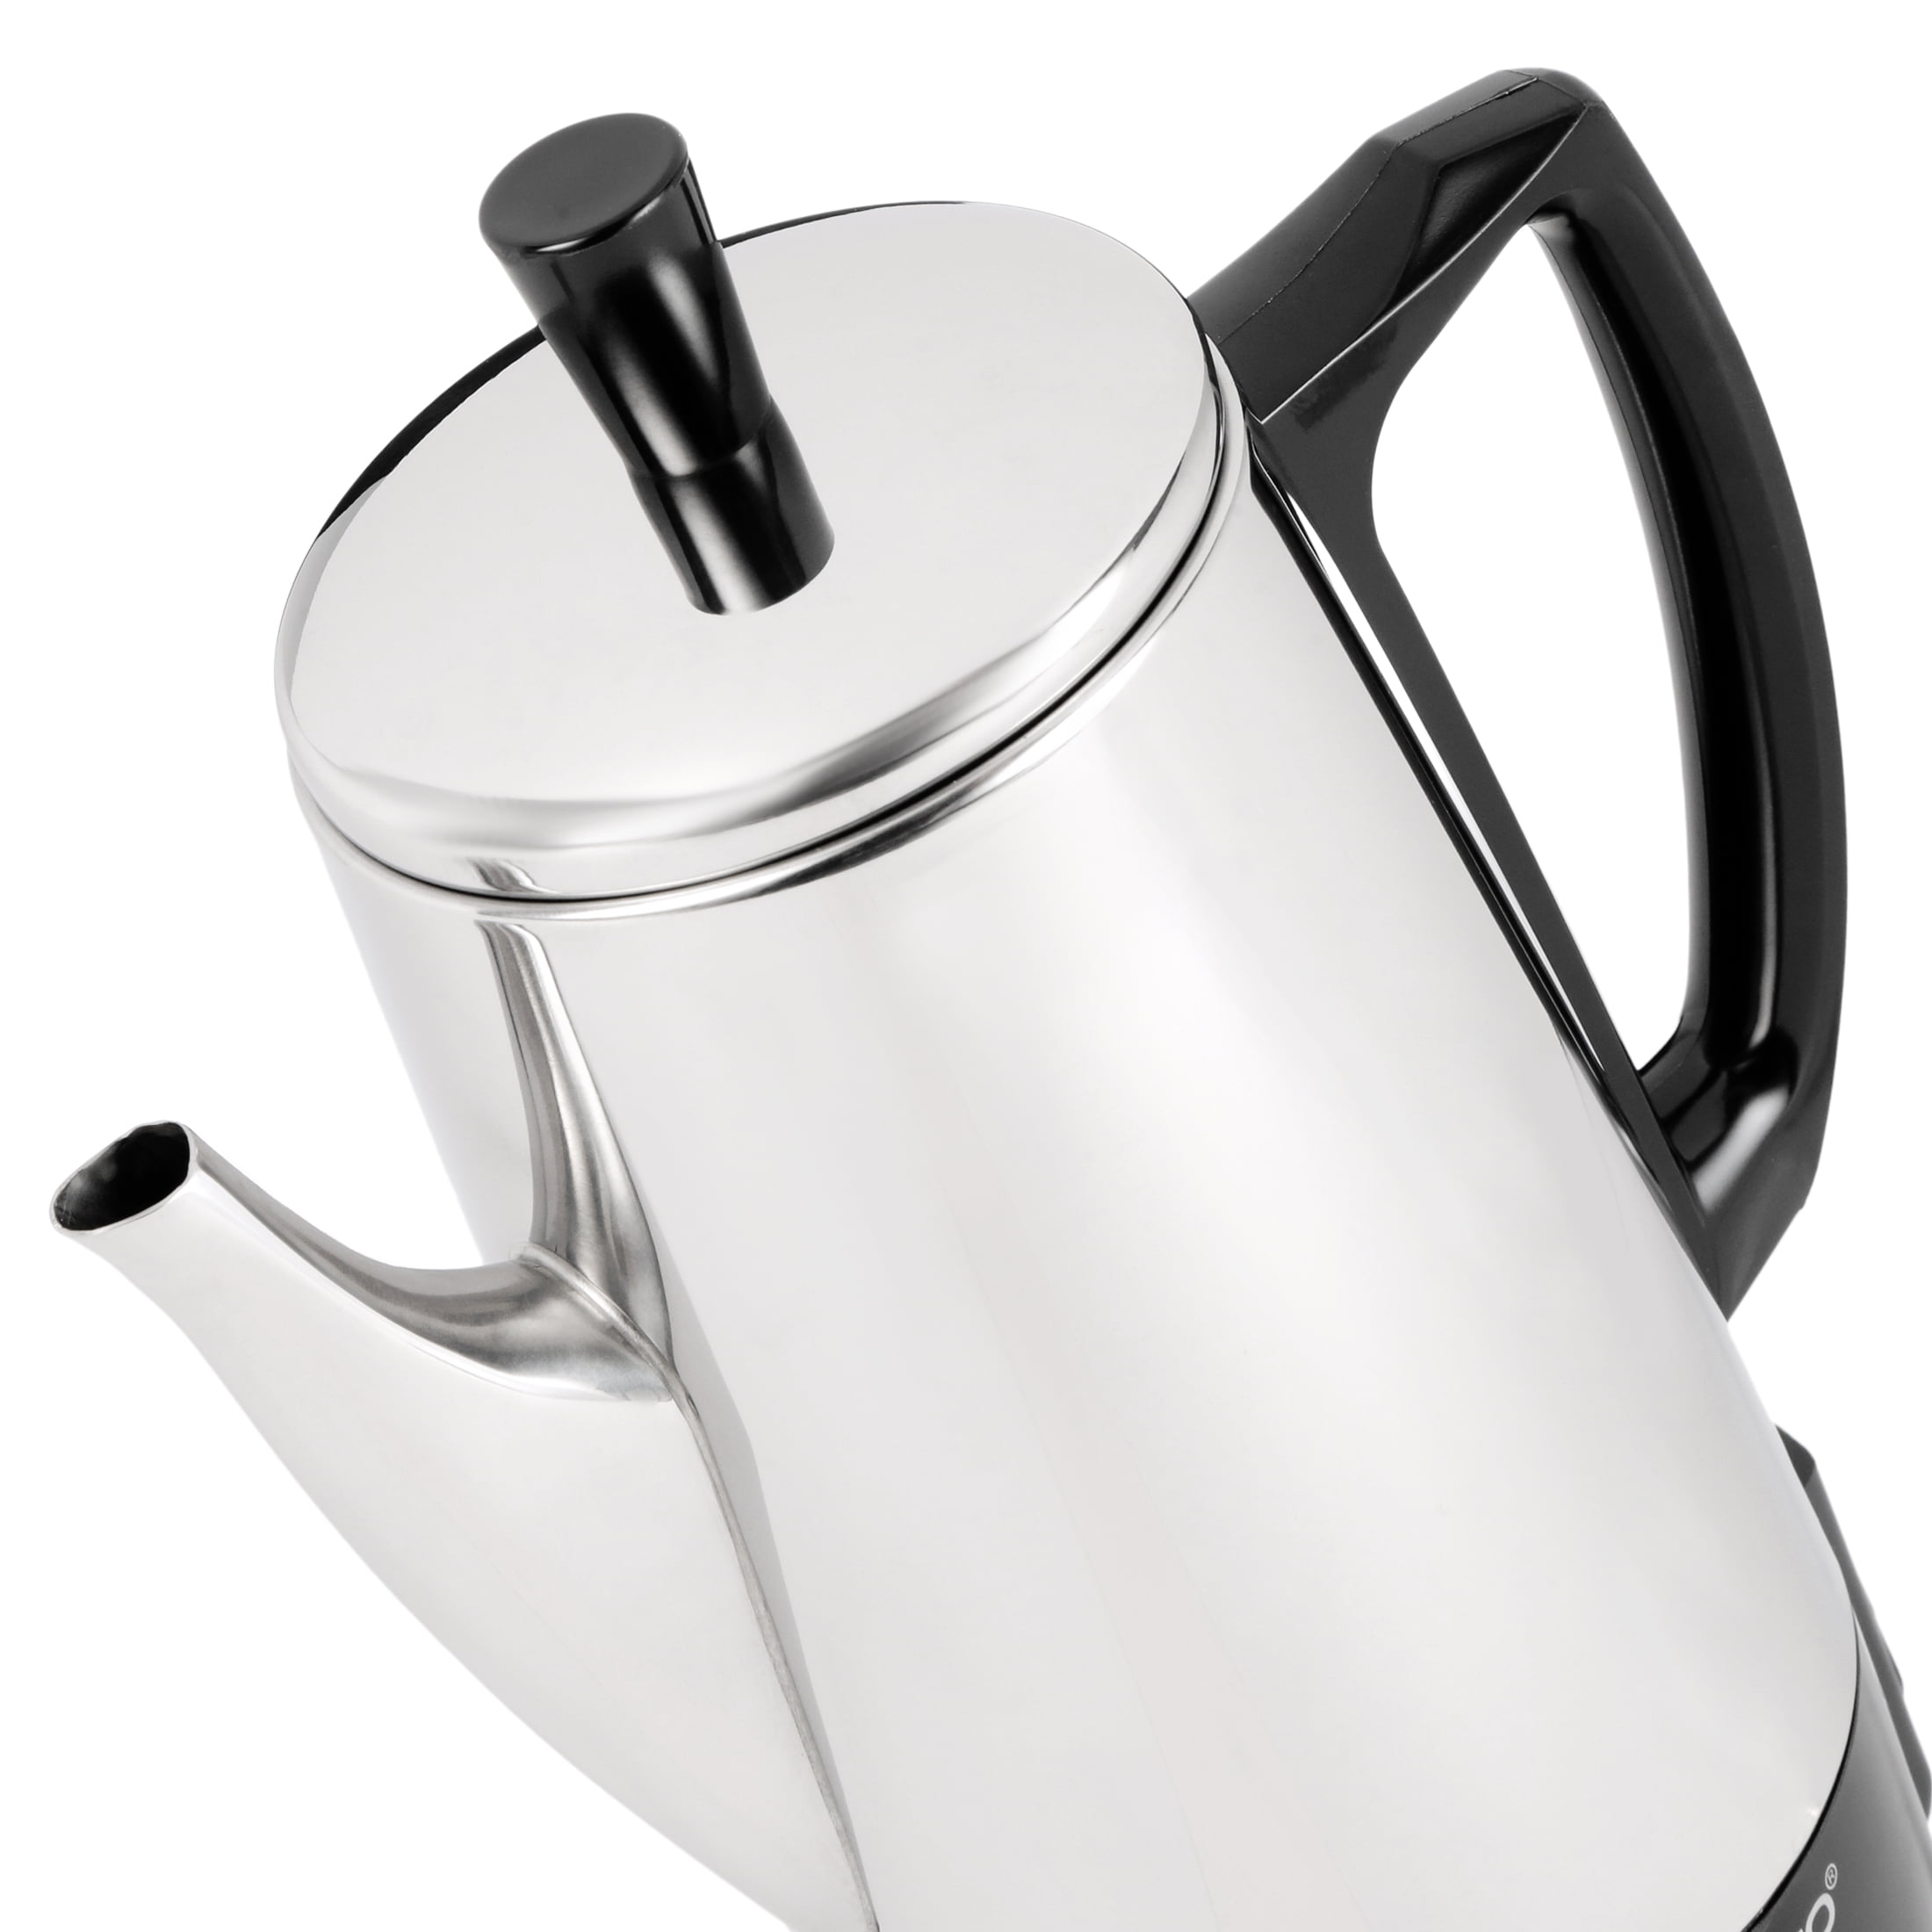 PRESTO 12 CUP Stainless Steel Electric COFFEE PERCOLATOR Clean Works